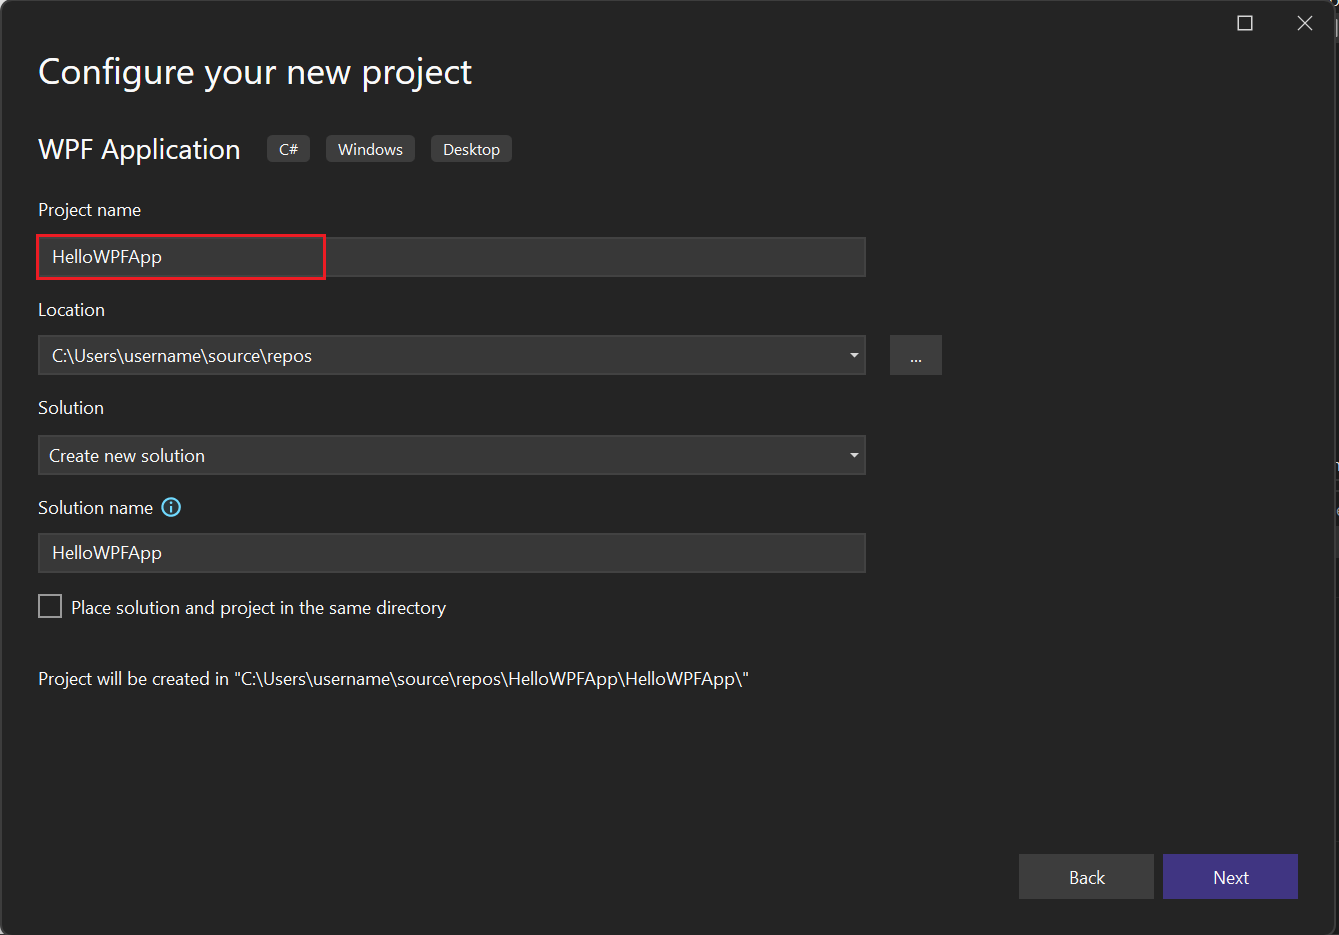 Screenshot of the 'Configure your new project' dialog with 'HelloWPFApp' entered in the Project name field.